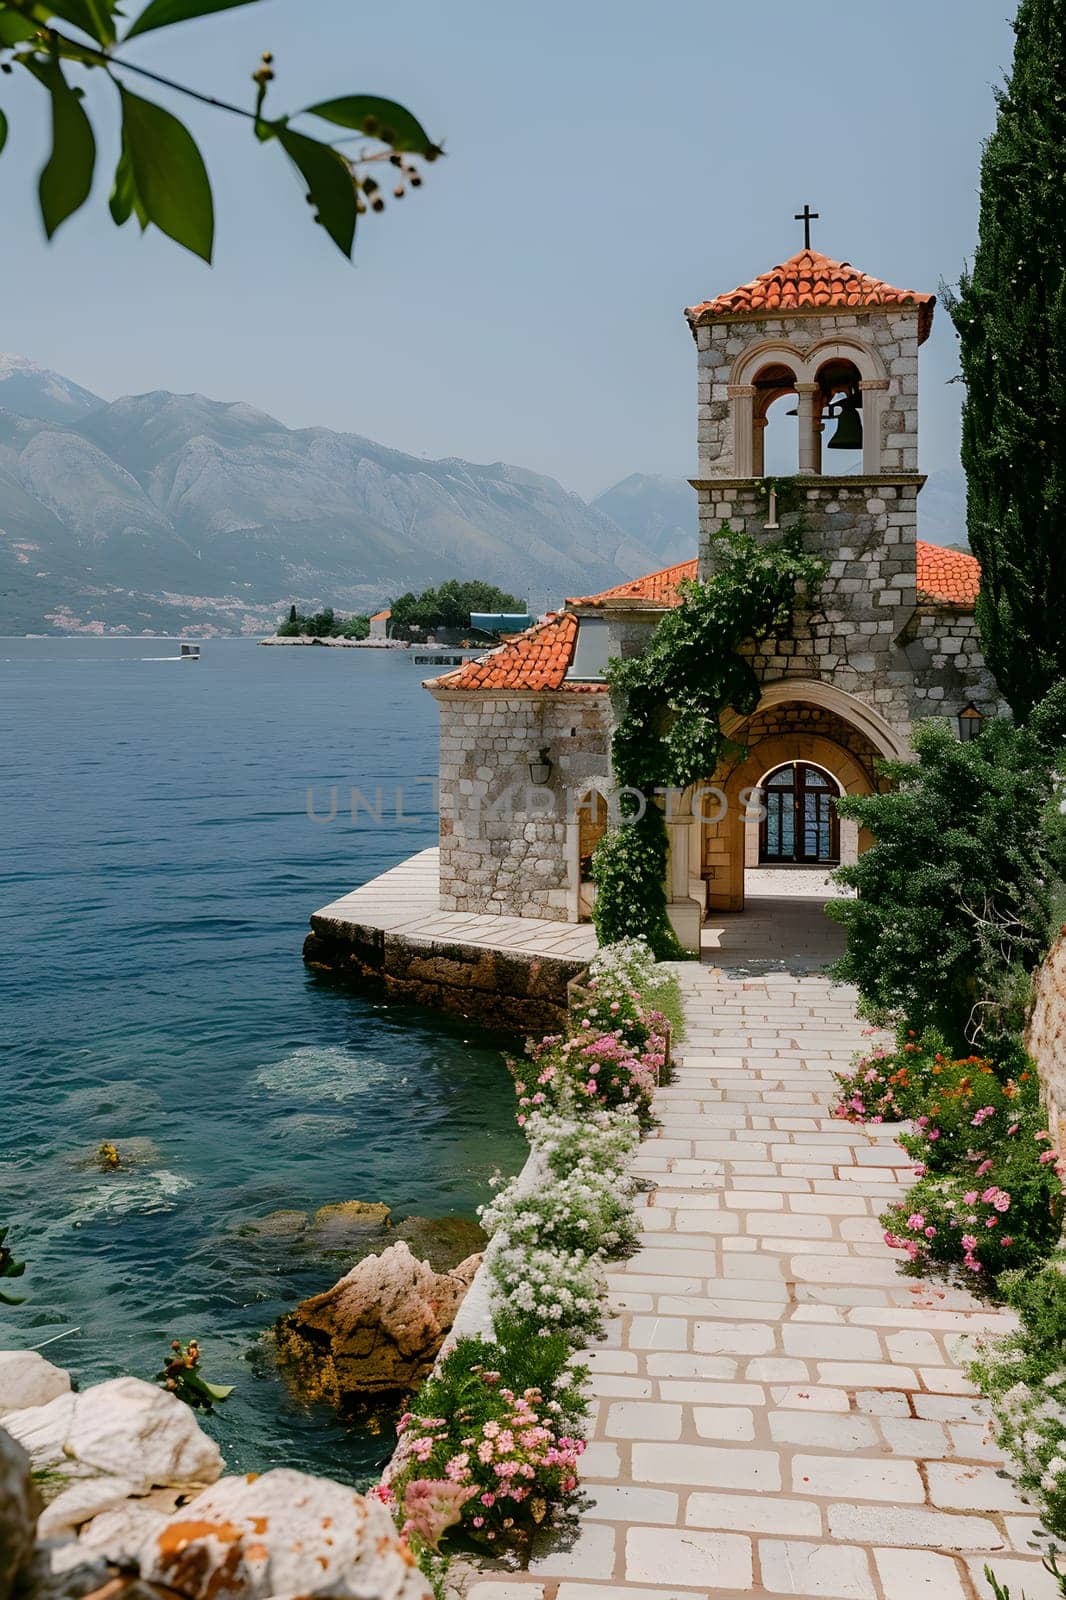 A quaint church sits on a small island surrounded by water, with a beautiful natural landscape of sky, plants, and a serene lake. A peaceful place for travel and contemplation